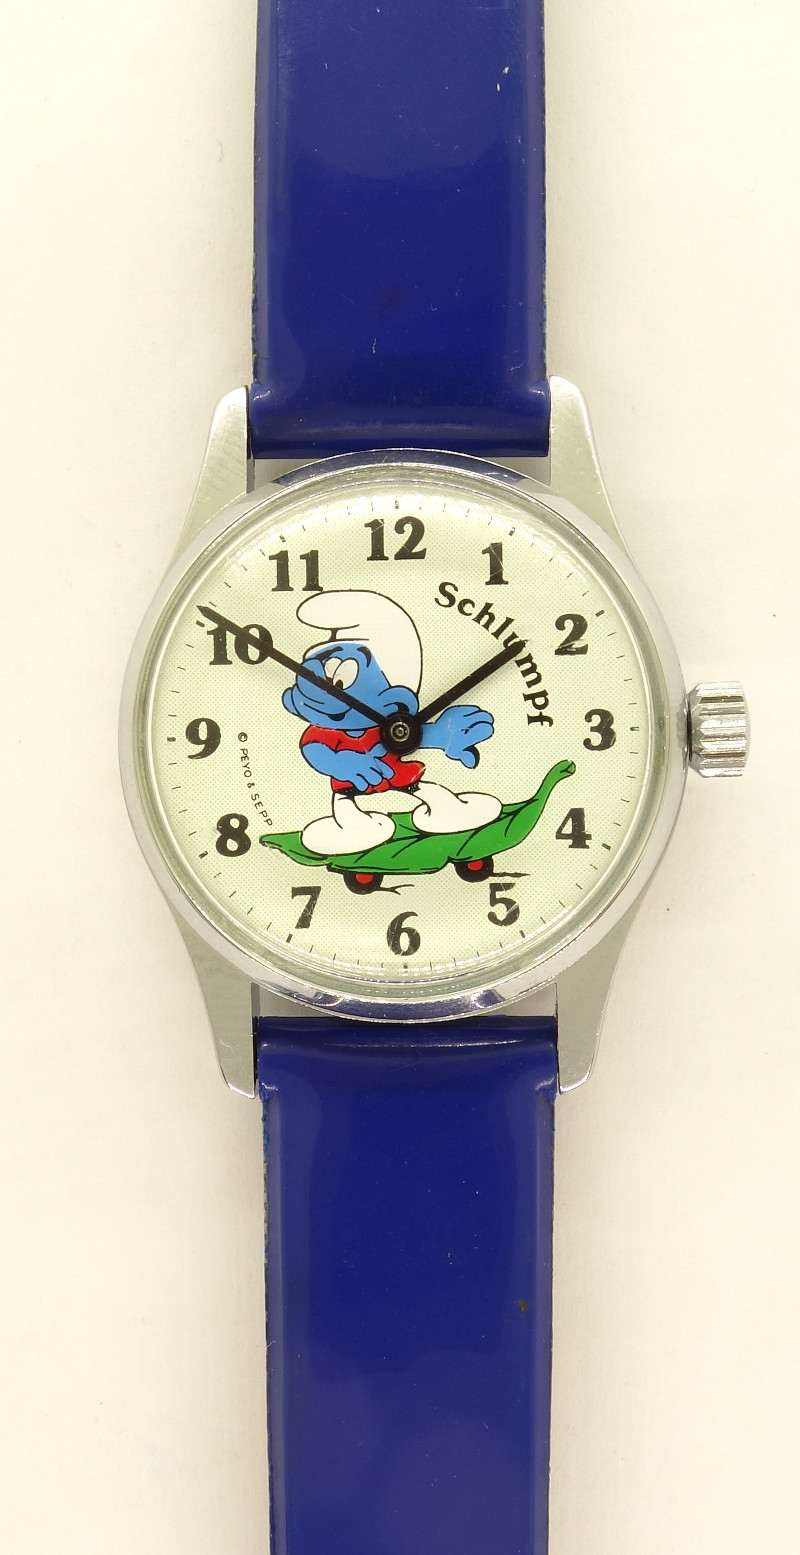 Character watch "Smurf"